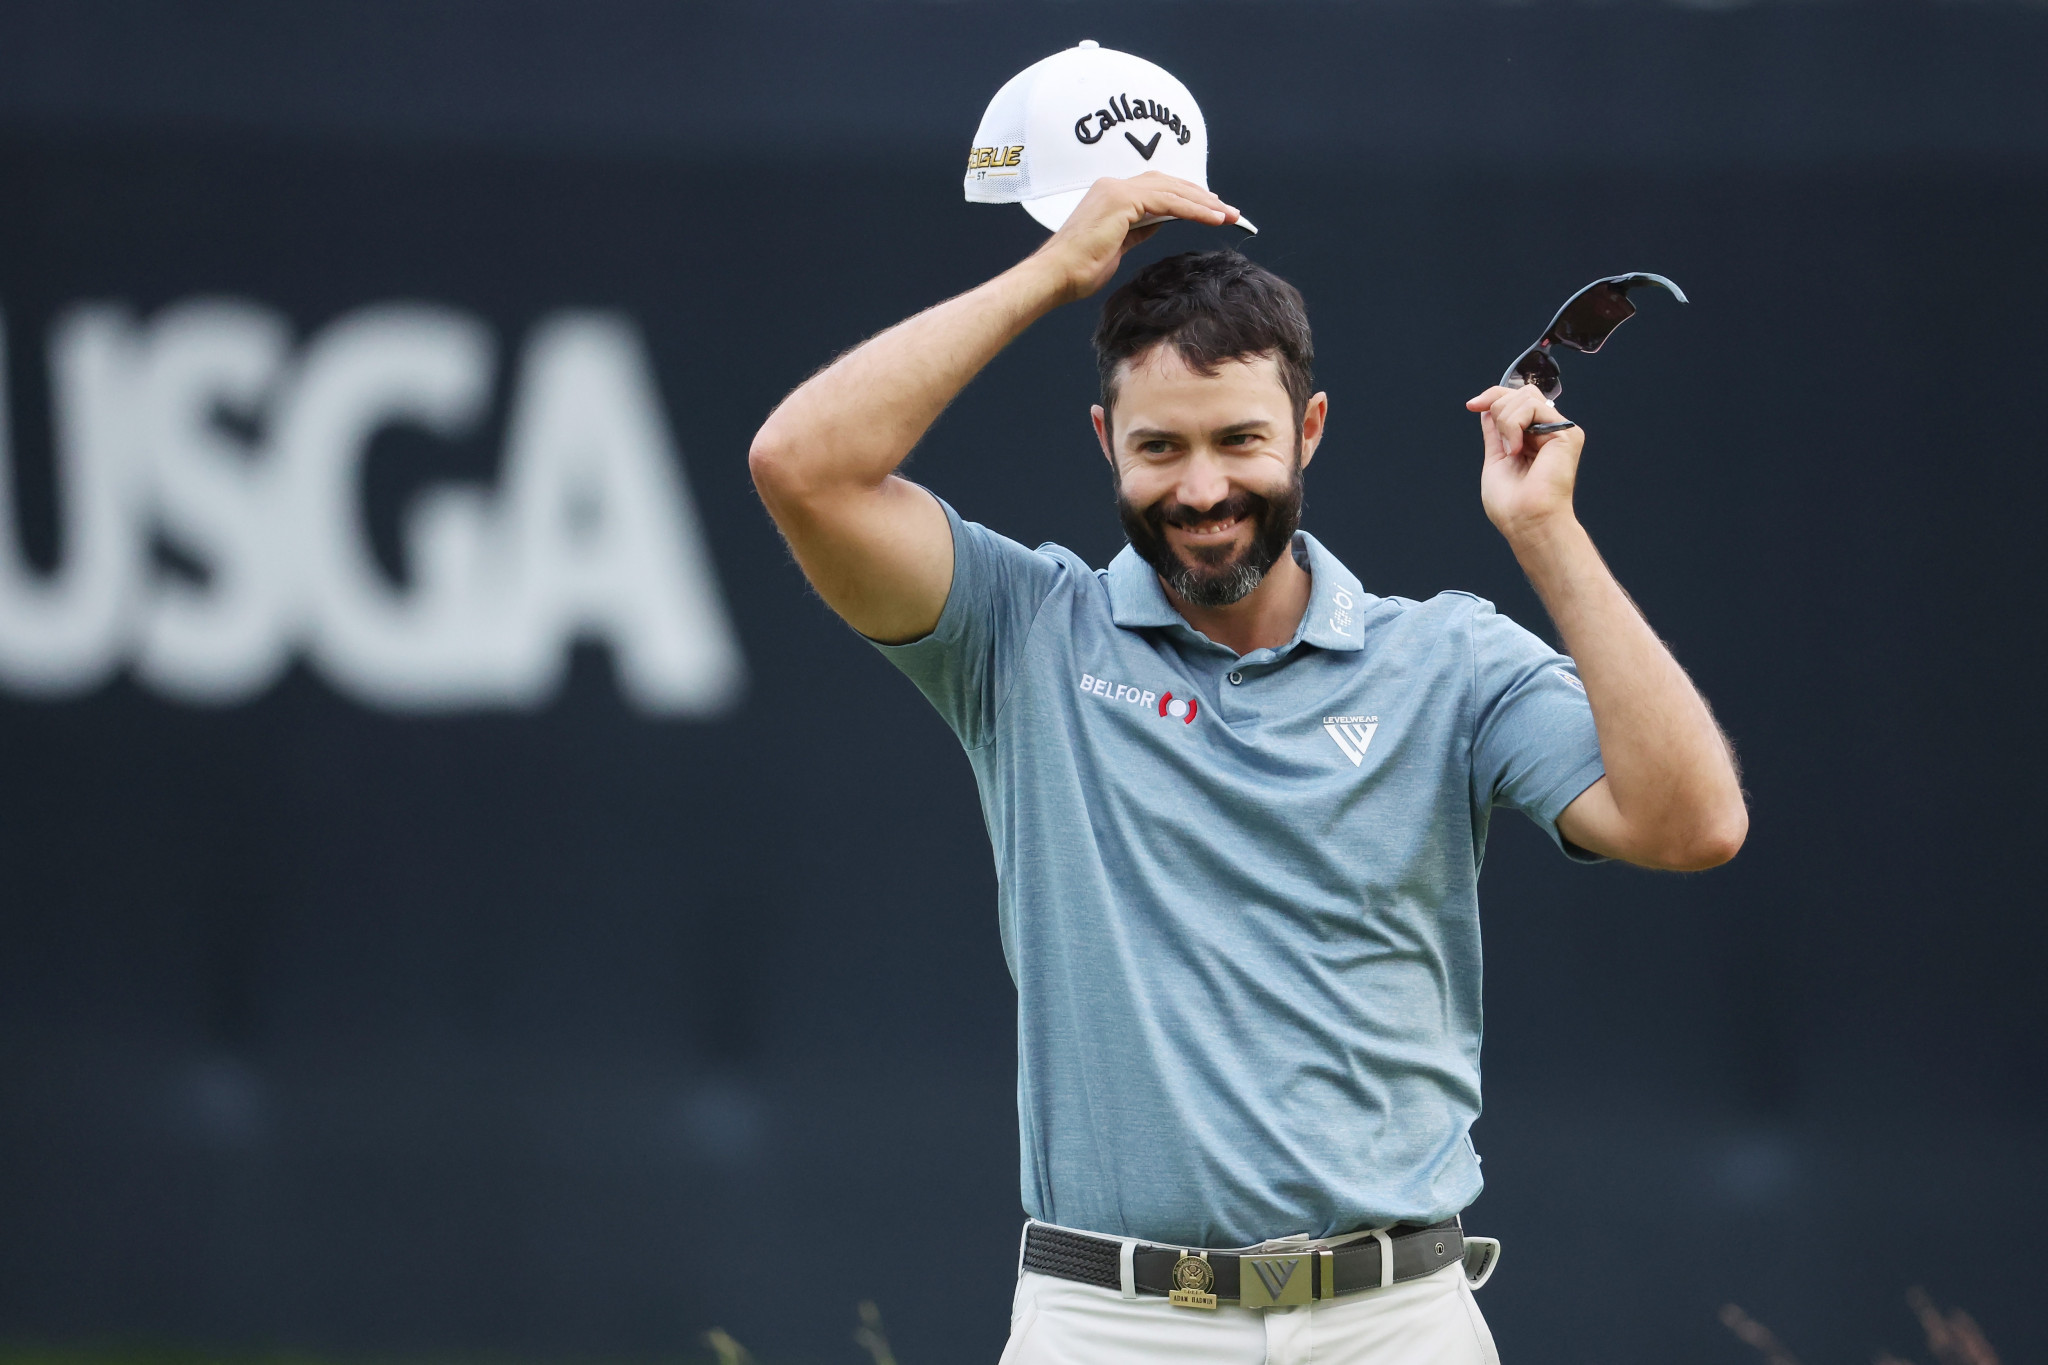 Hadwin takes early lead at US Open with McIlroy one shot behind